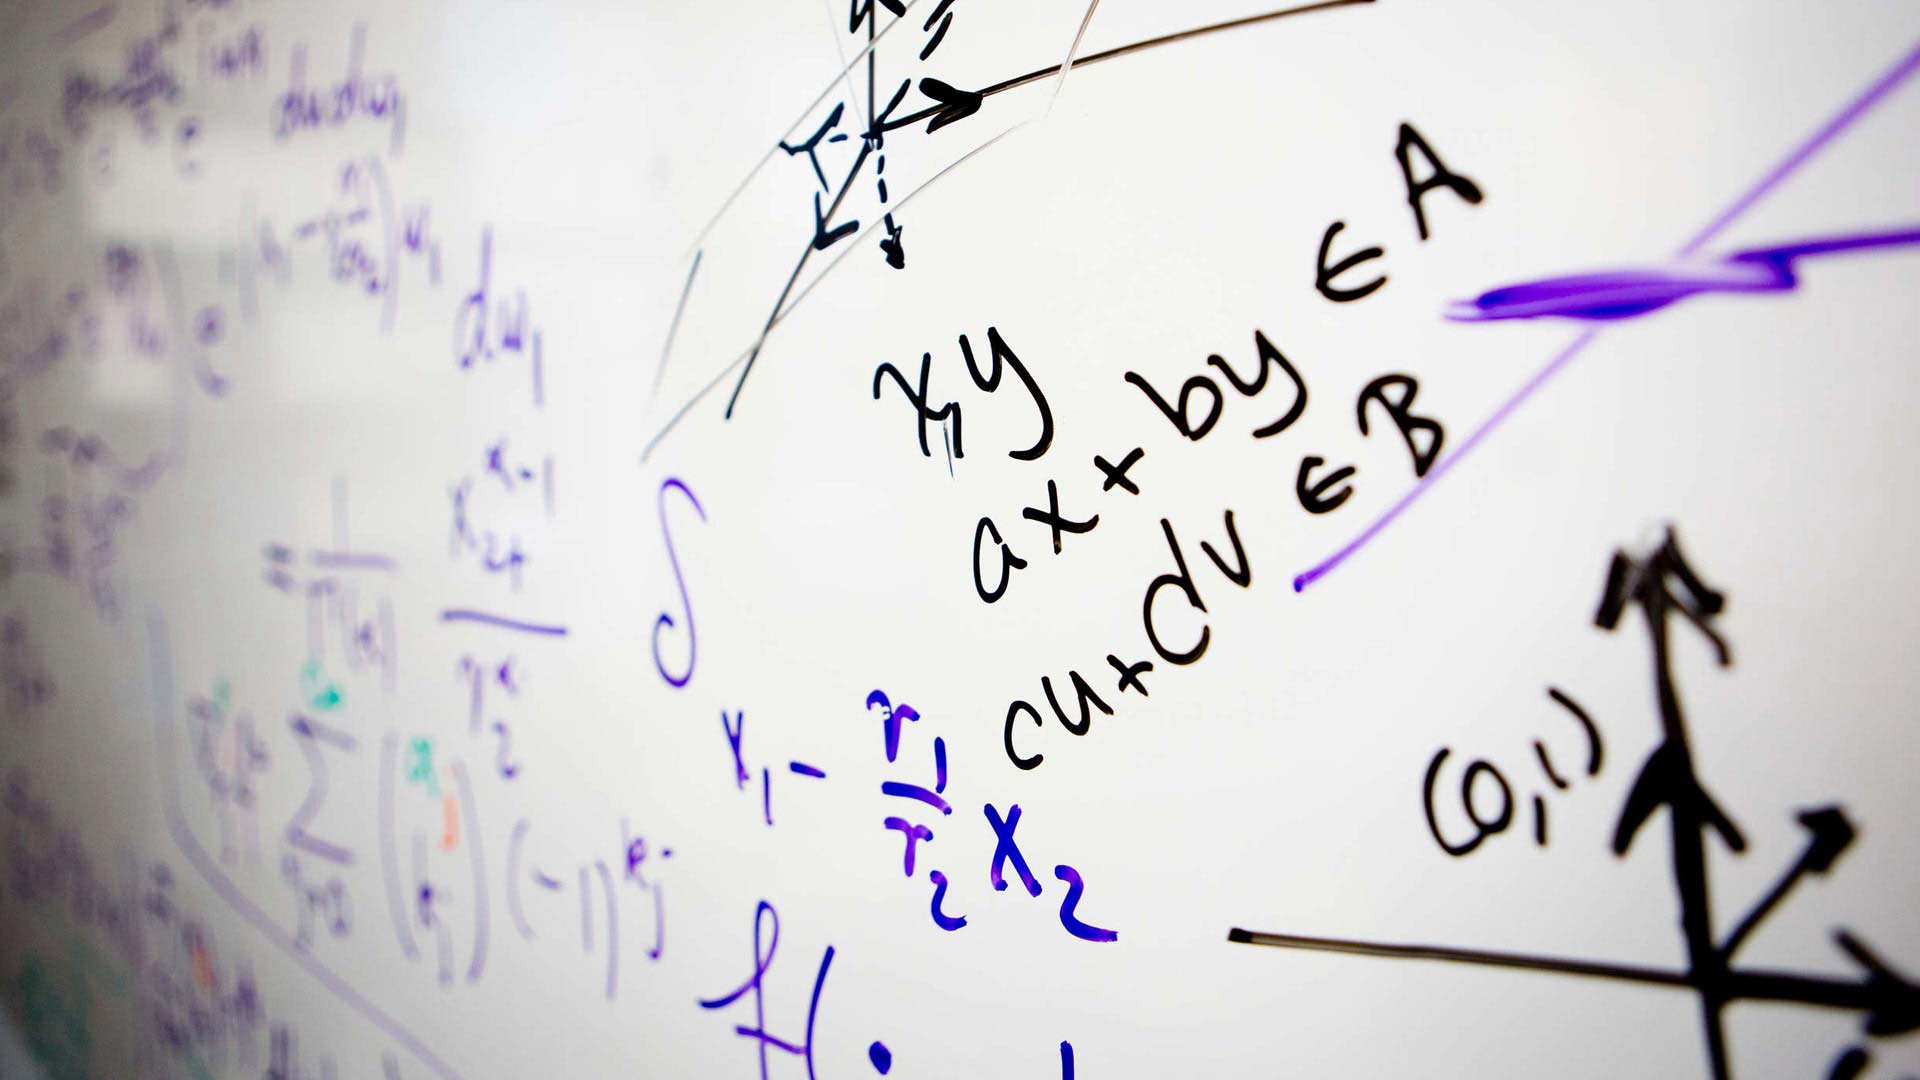 Photo of a whiteboard with mathematical equations written on it.